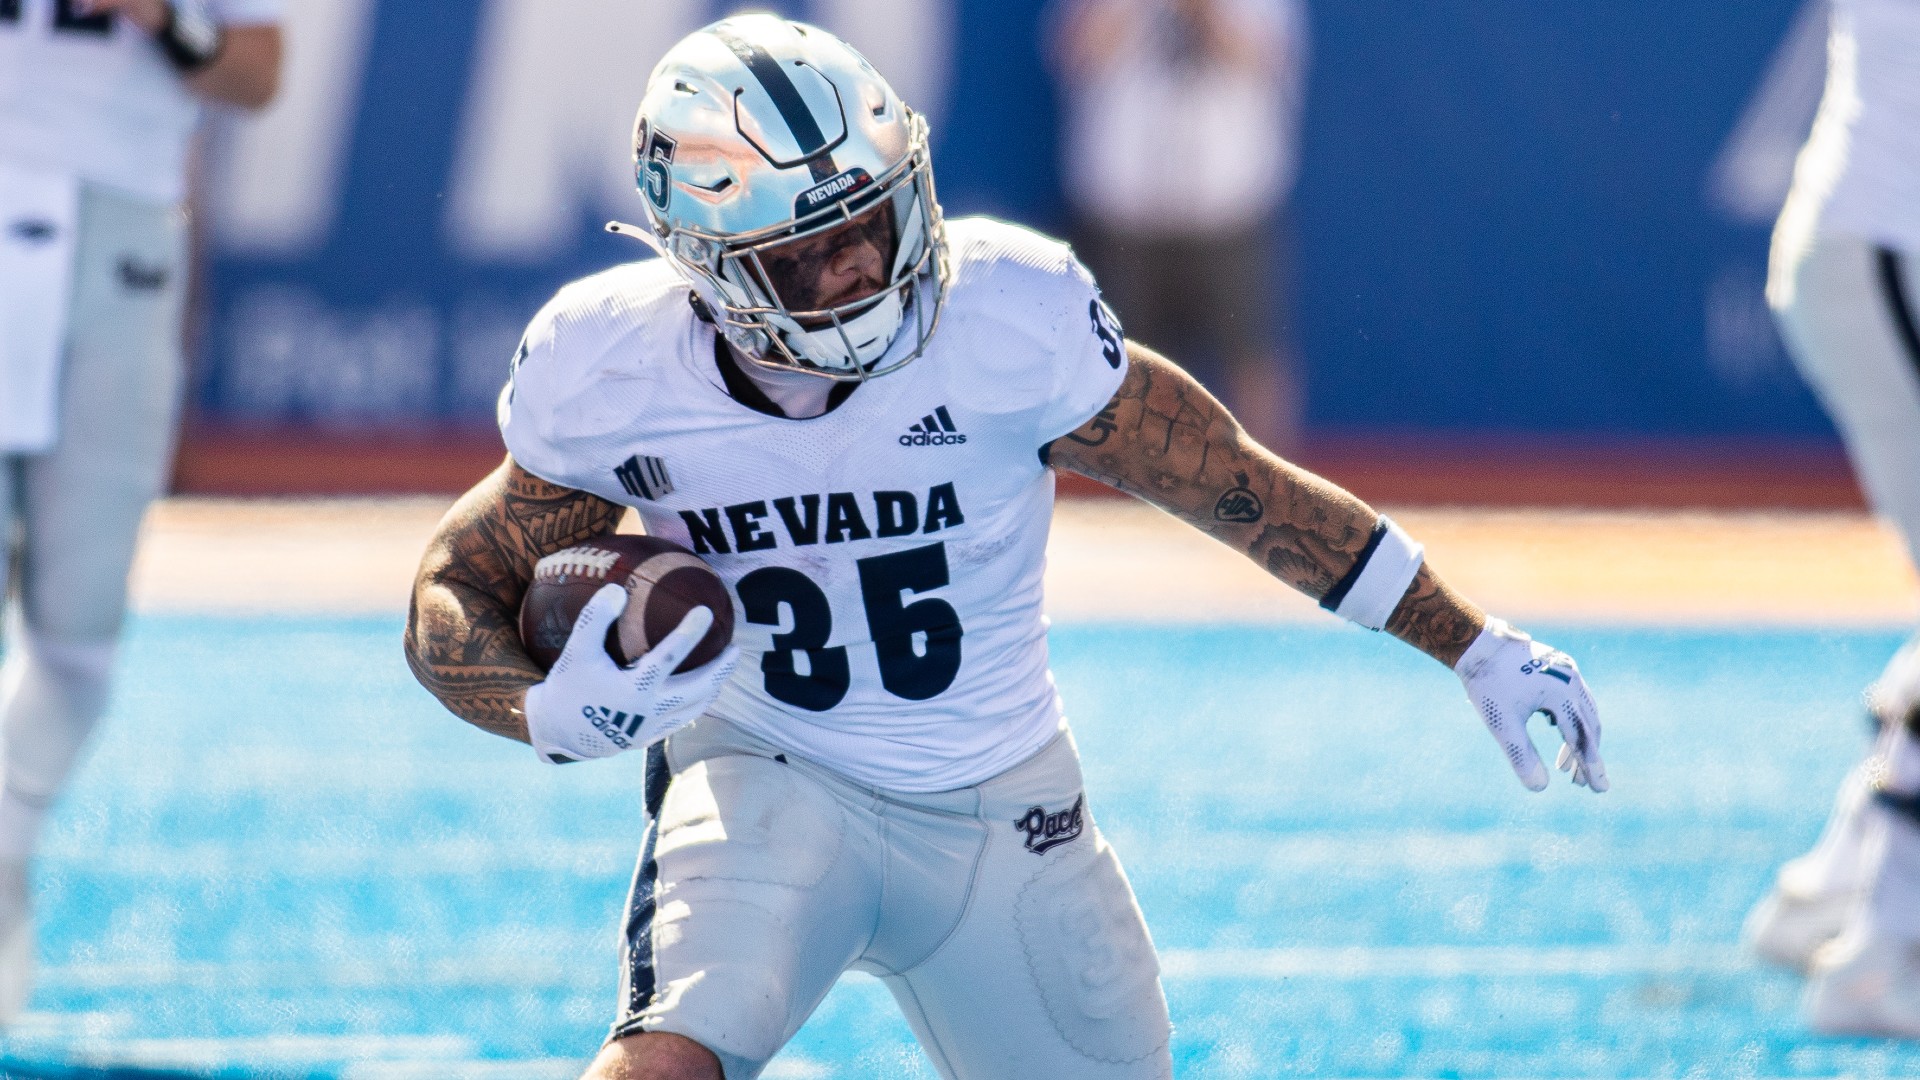 New Mexico State vs. Nevada, Odds, Pick, Preview: Can Aggies Cover Spread Against Wolf Pack? article feature image